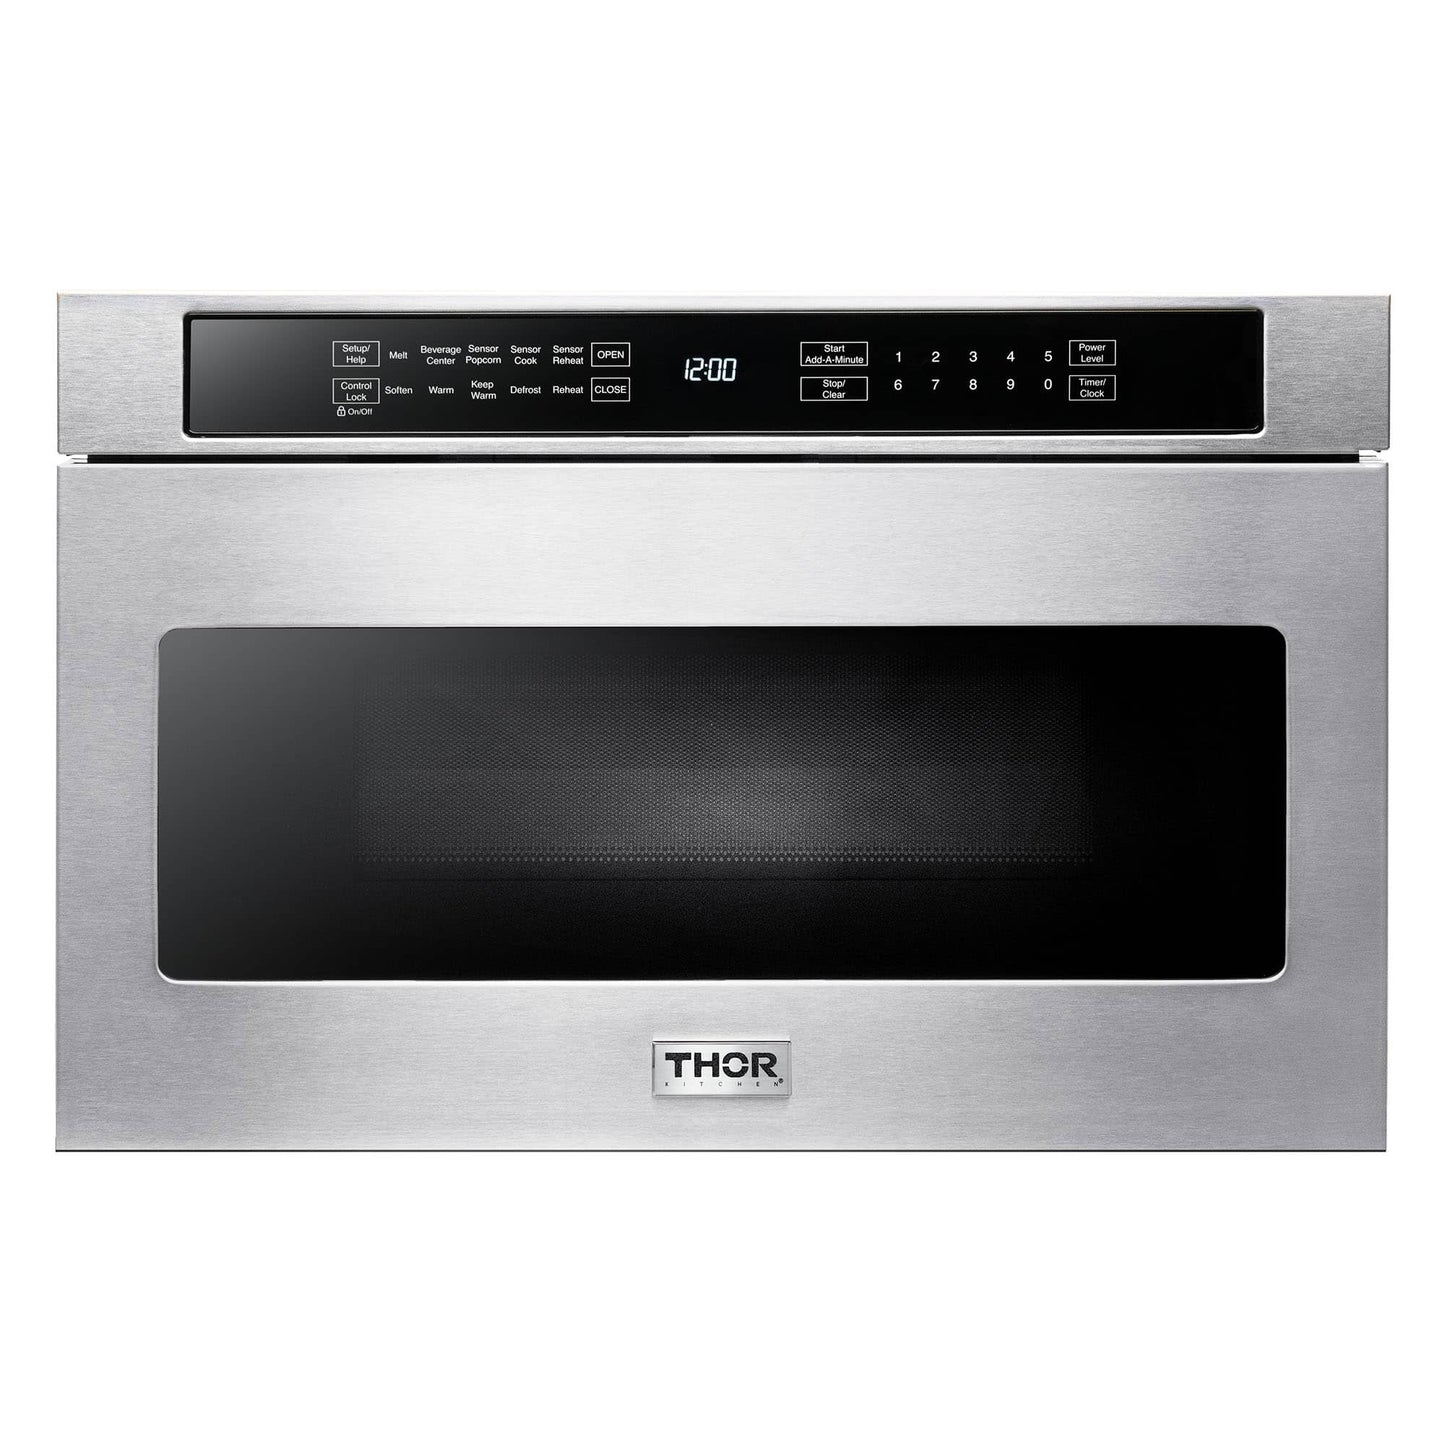 Thor Kitchen 4-Piece Appliance Package - 24-Inch Electric Range, Refrigerator, Dishwasher, and Microwave Drawer in Stainless Steel